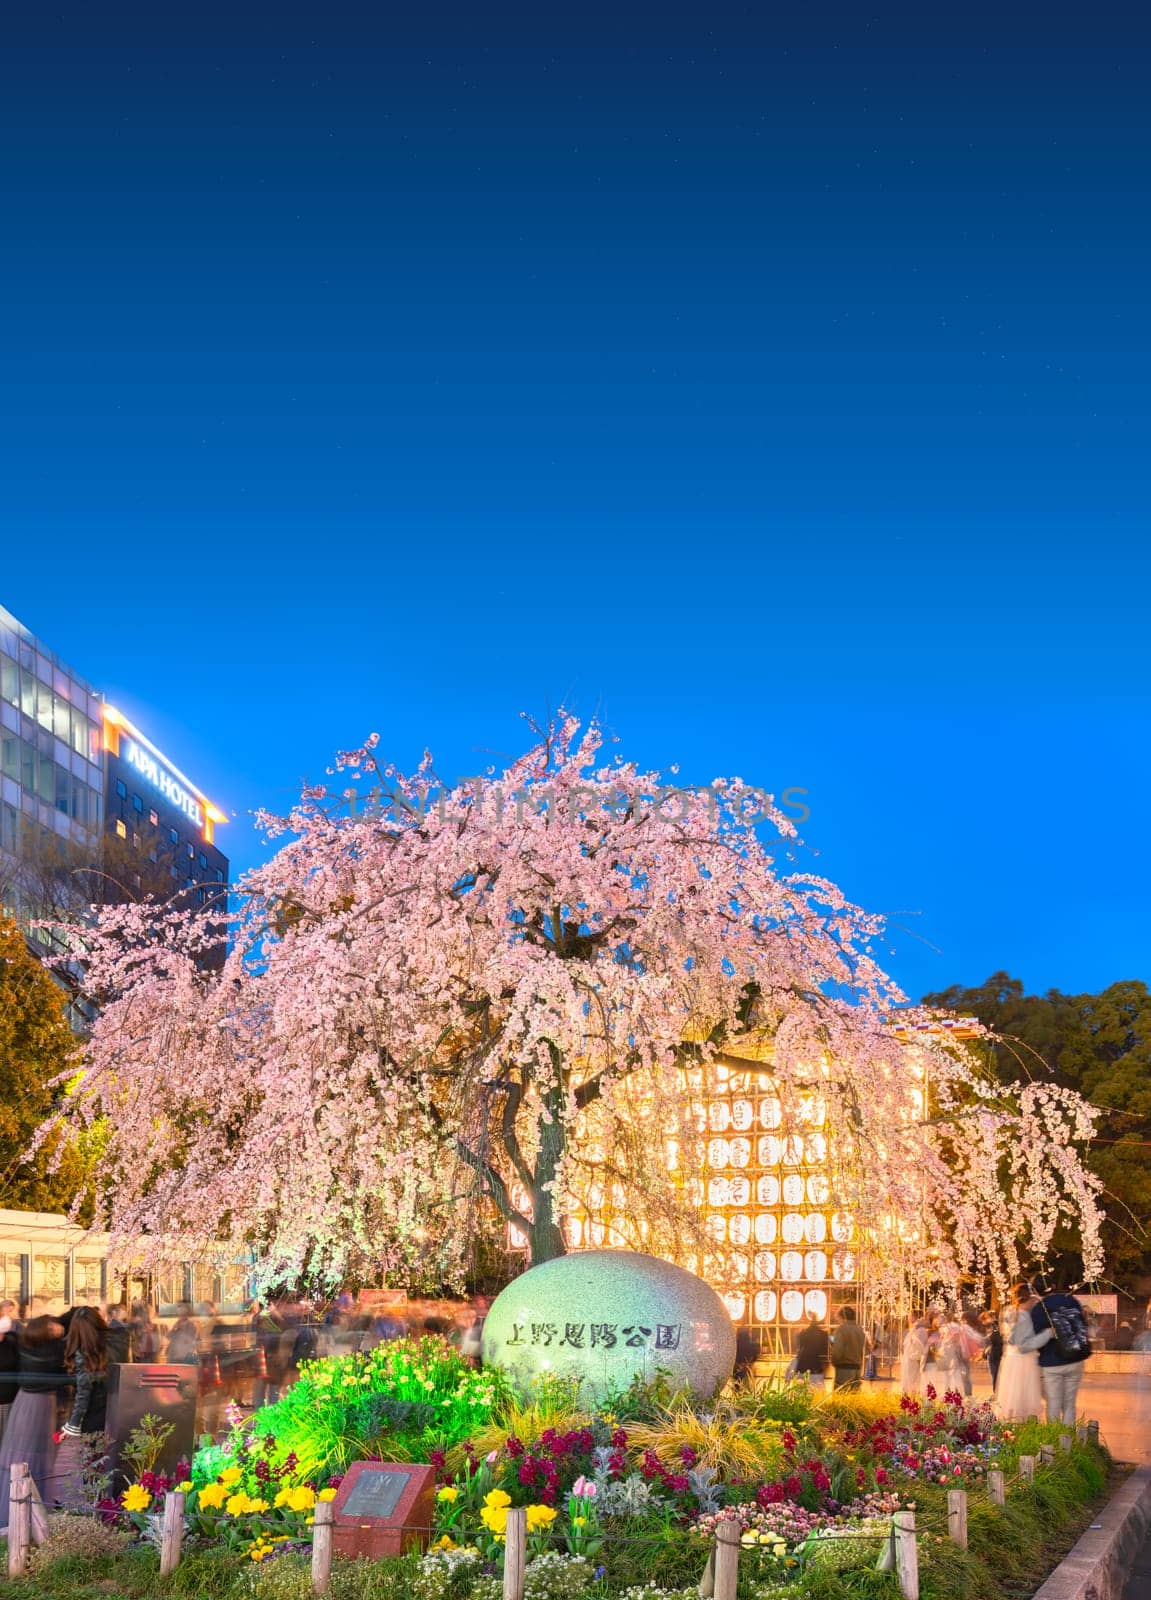 Light-up of a Japanese pink weeping cherry tree at the entrance of the Ueno Park in Japan, by kuremo